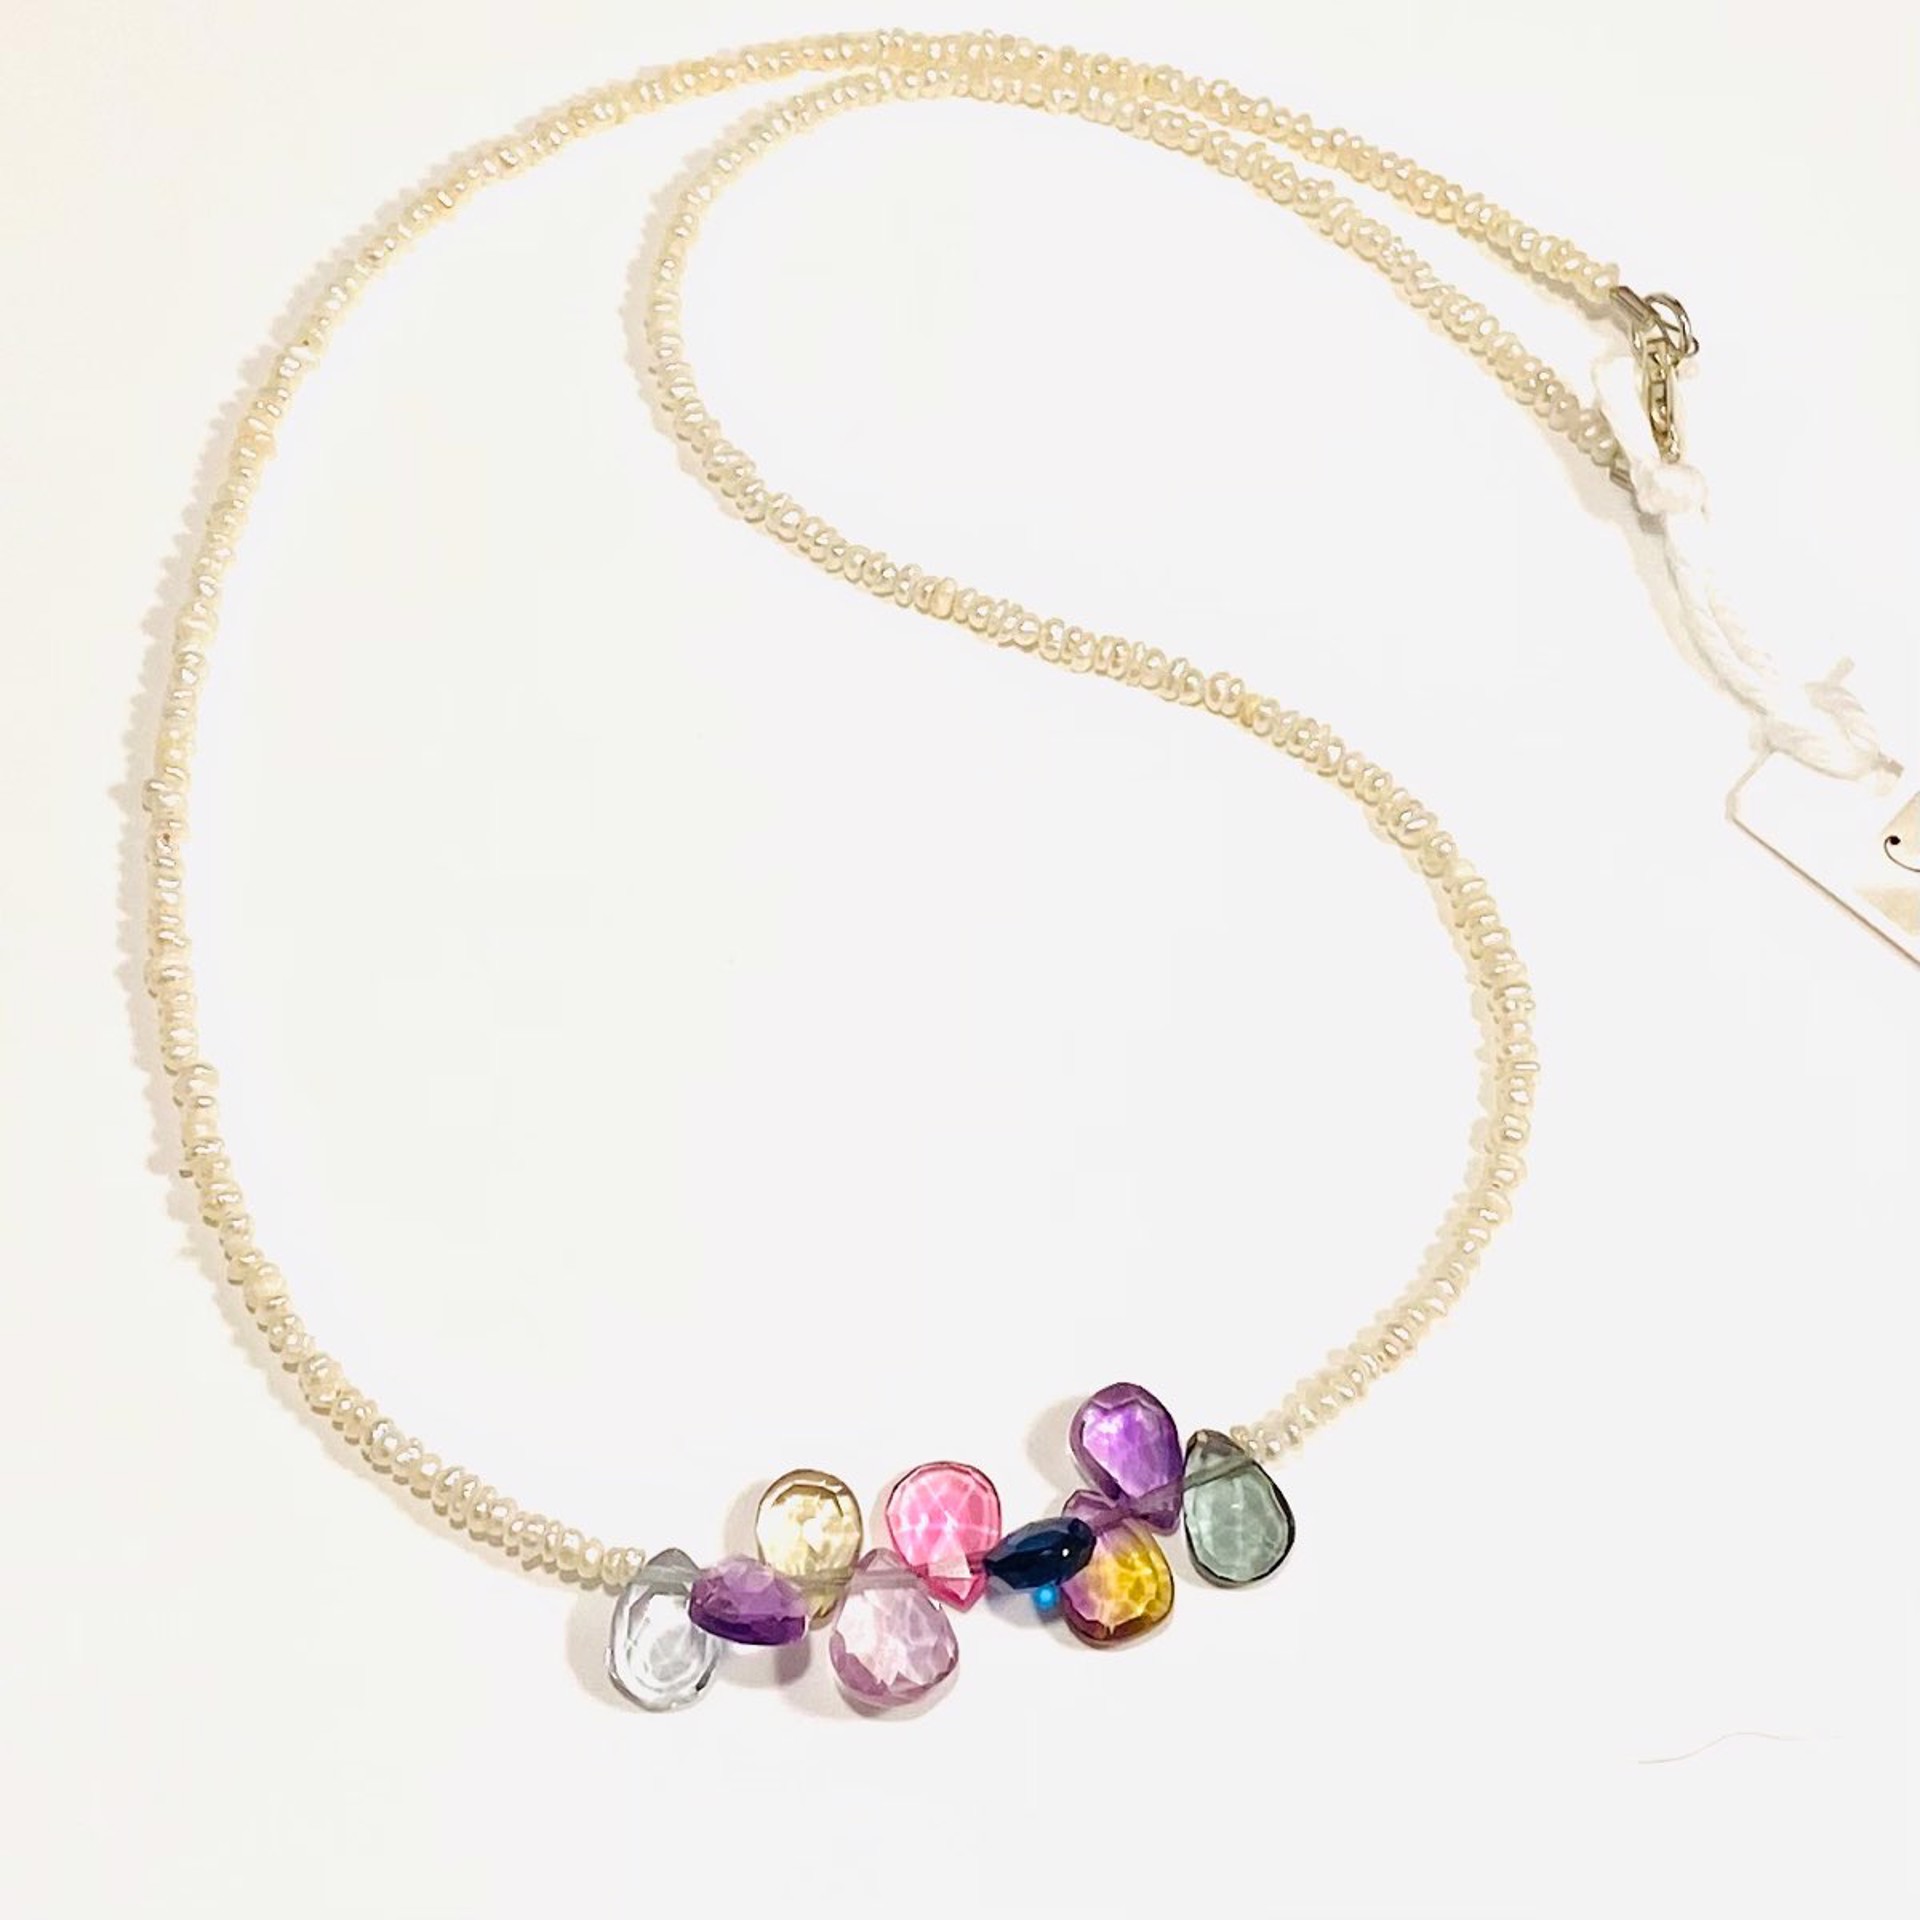 NT22-132 Tiny Seed Pearl Mixed Gemstone  Brios Necklace by Nance Trueworthy